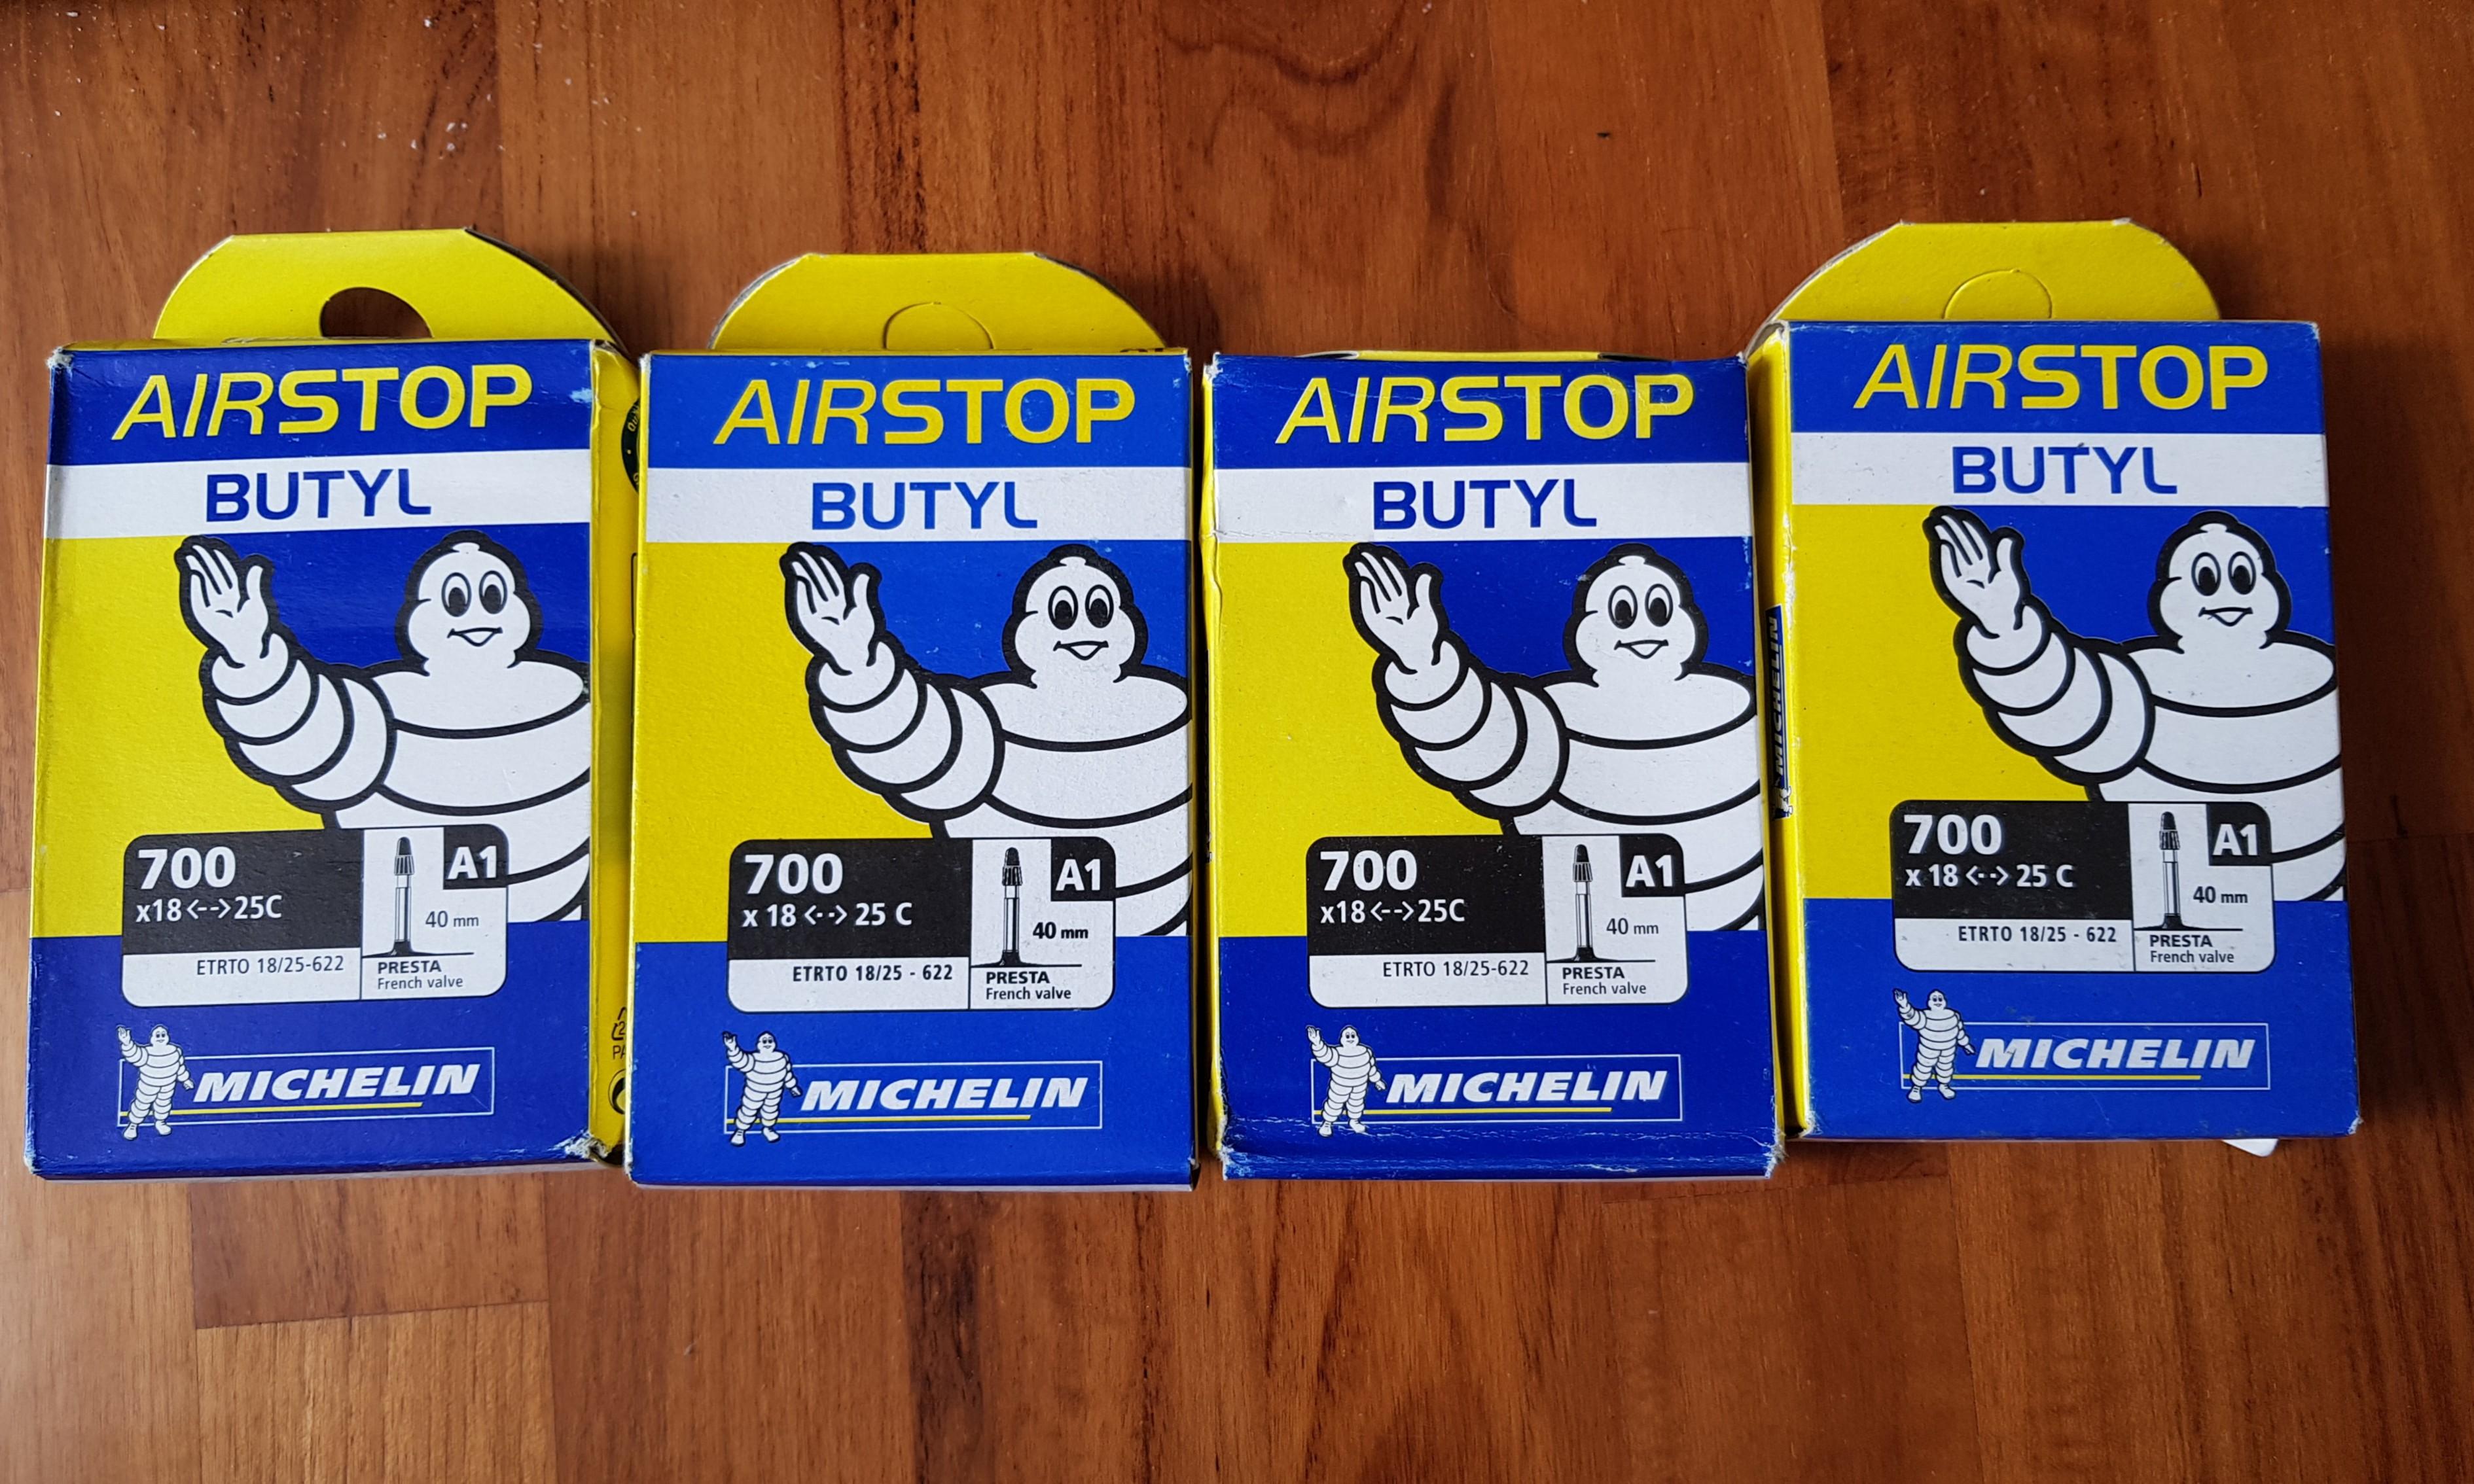 michelin airstop butyl